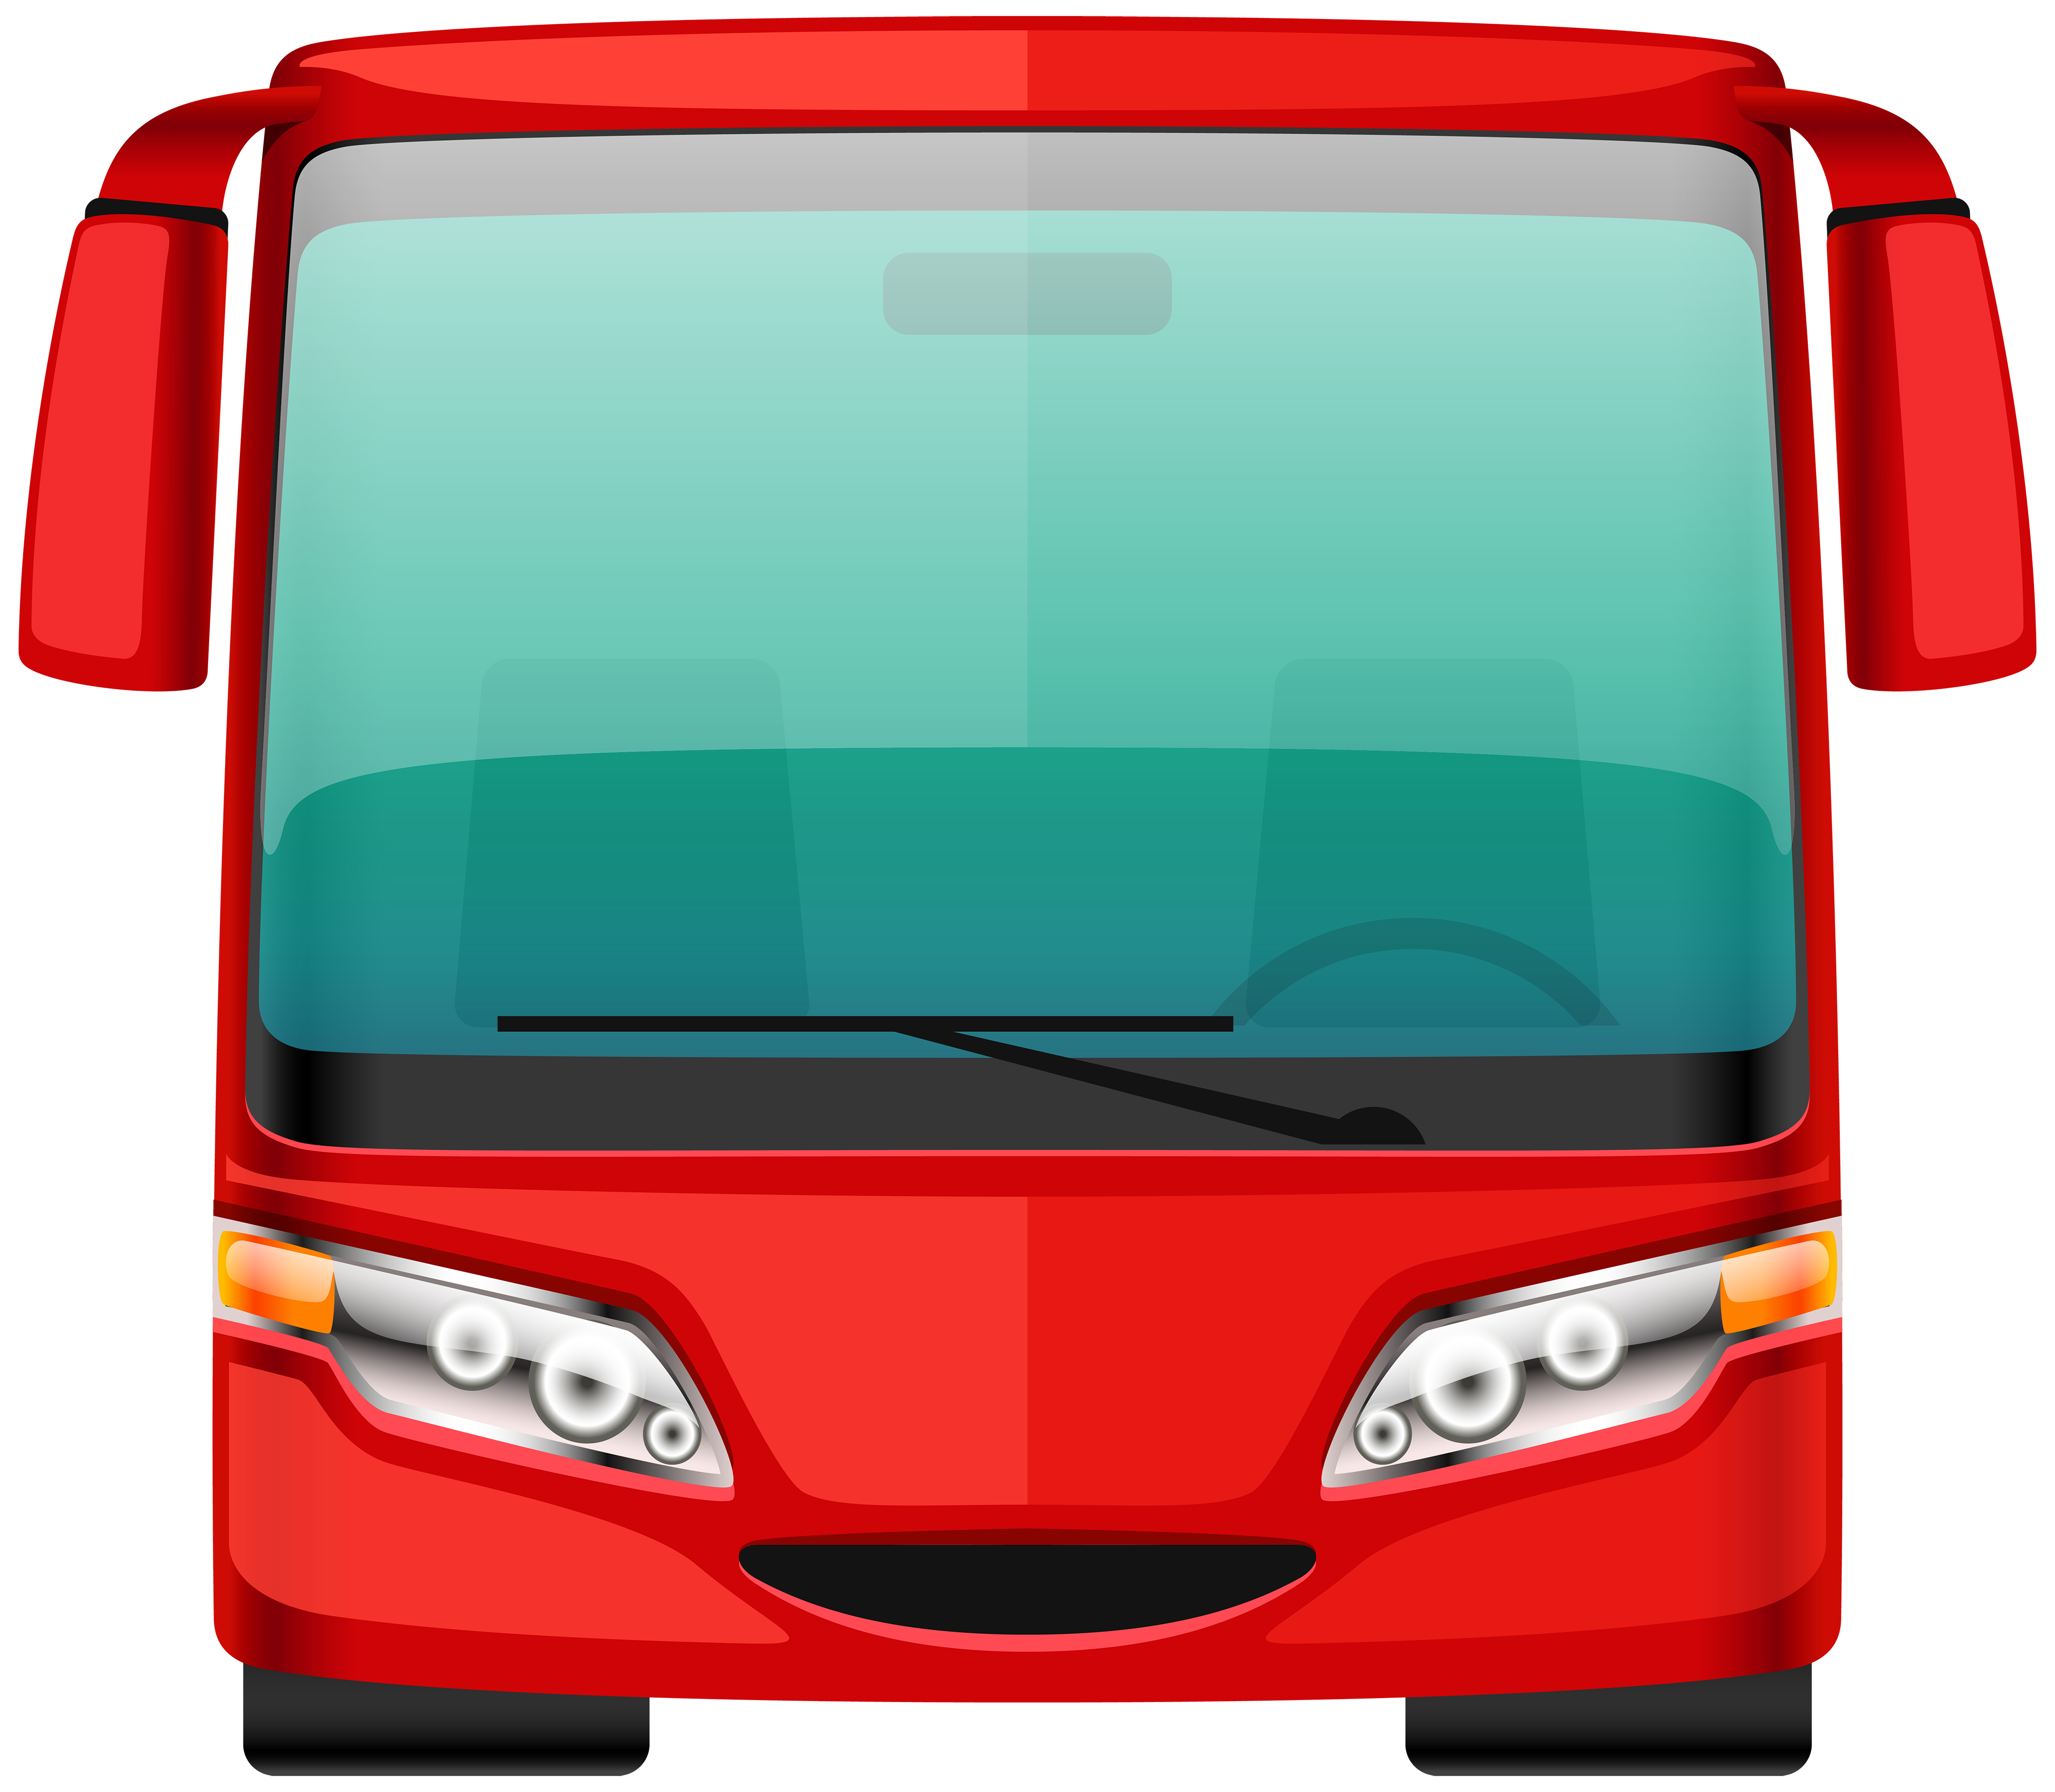 front of bus clipart - photo #14